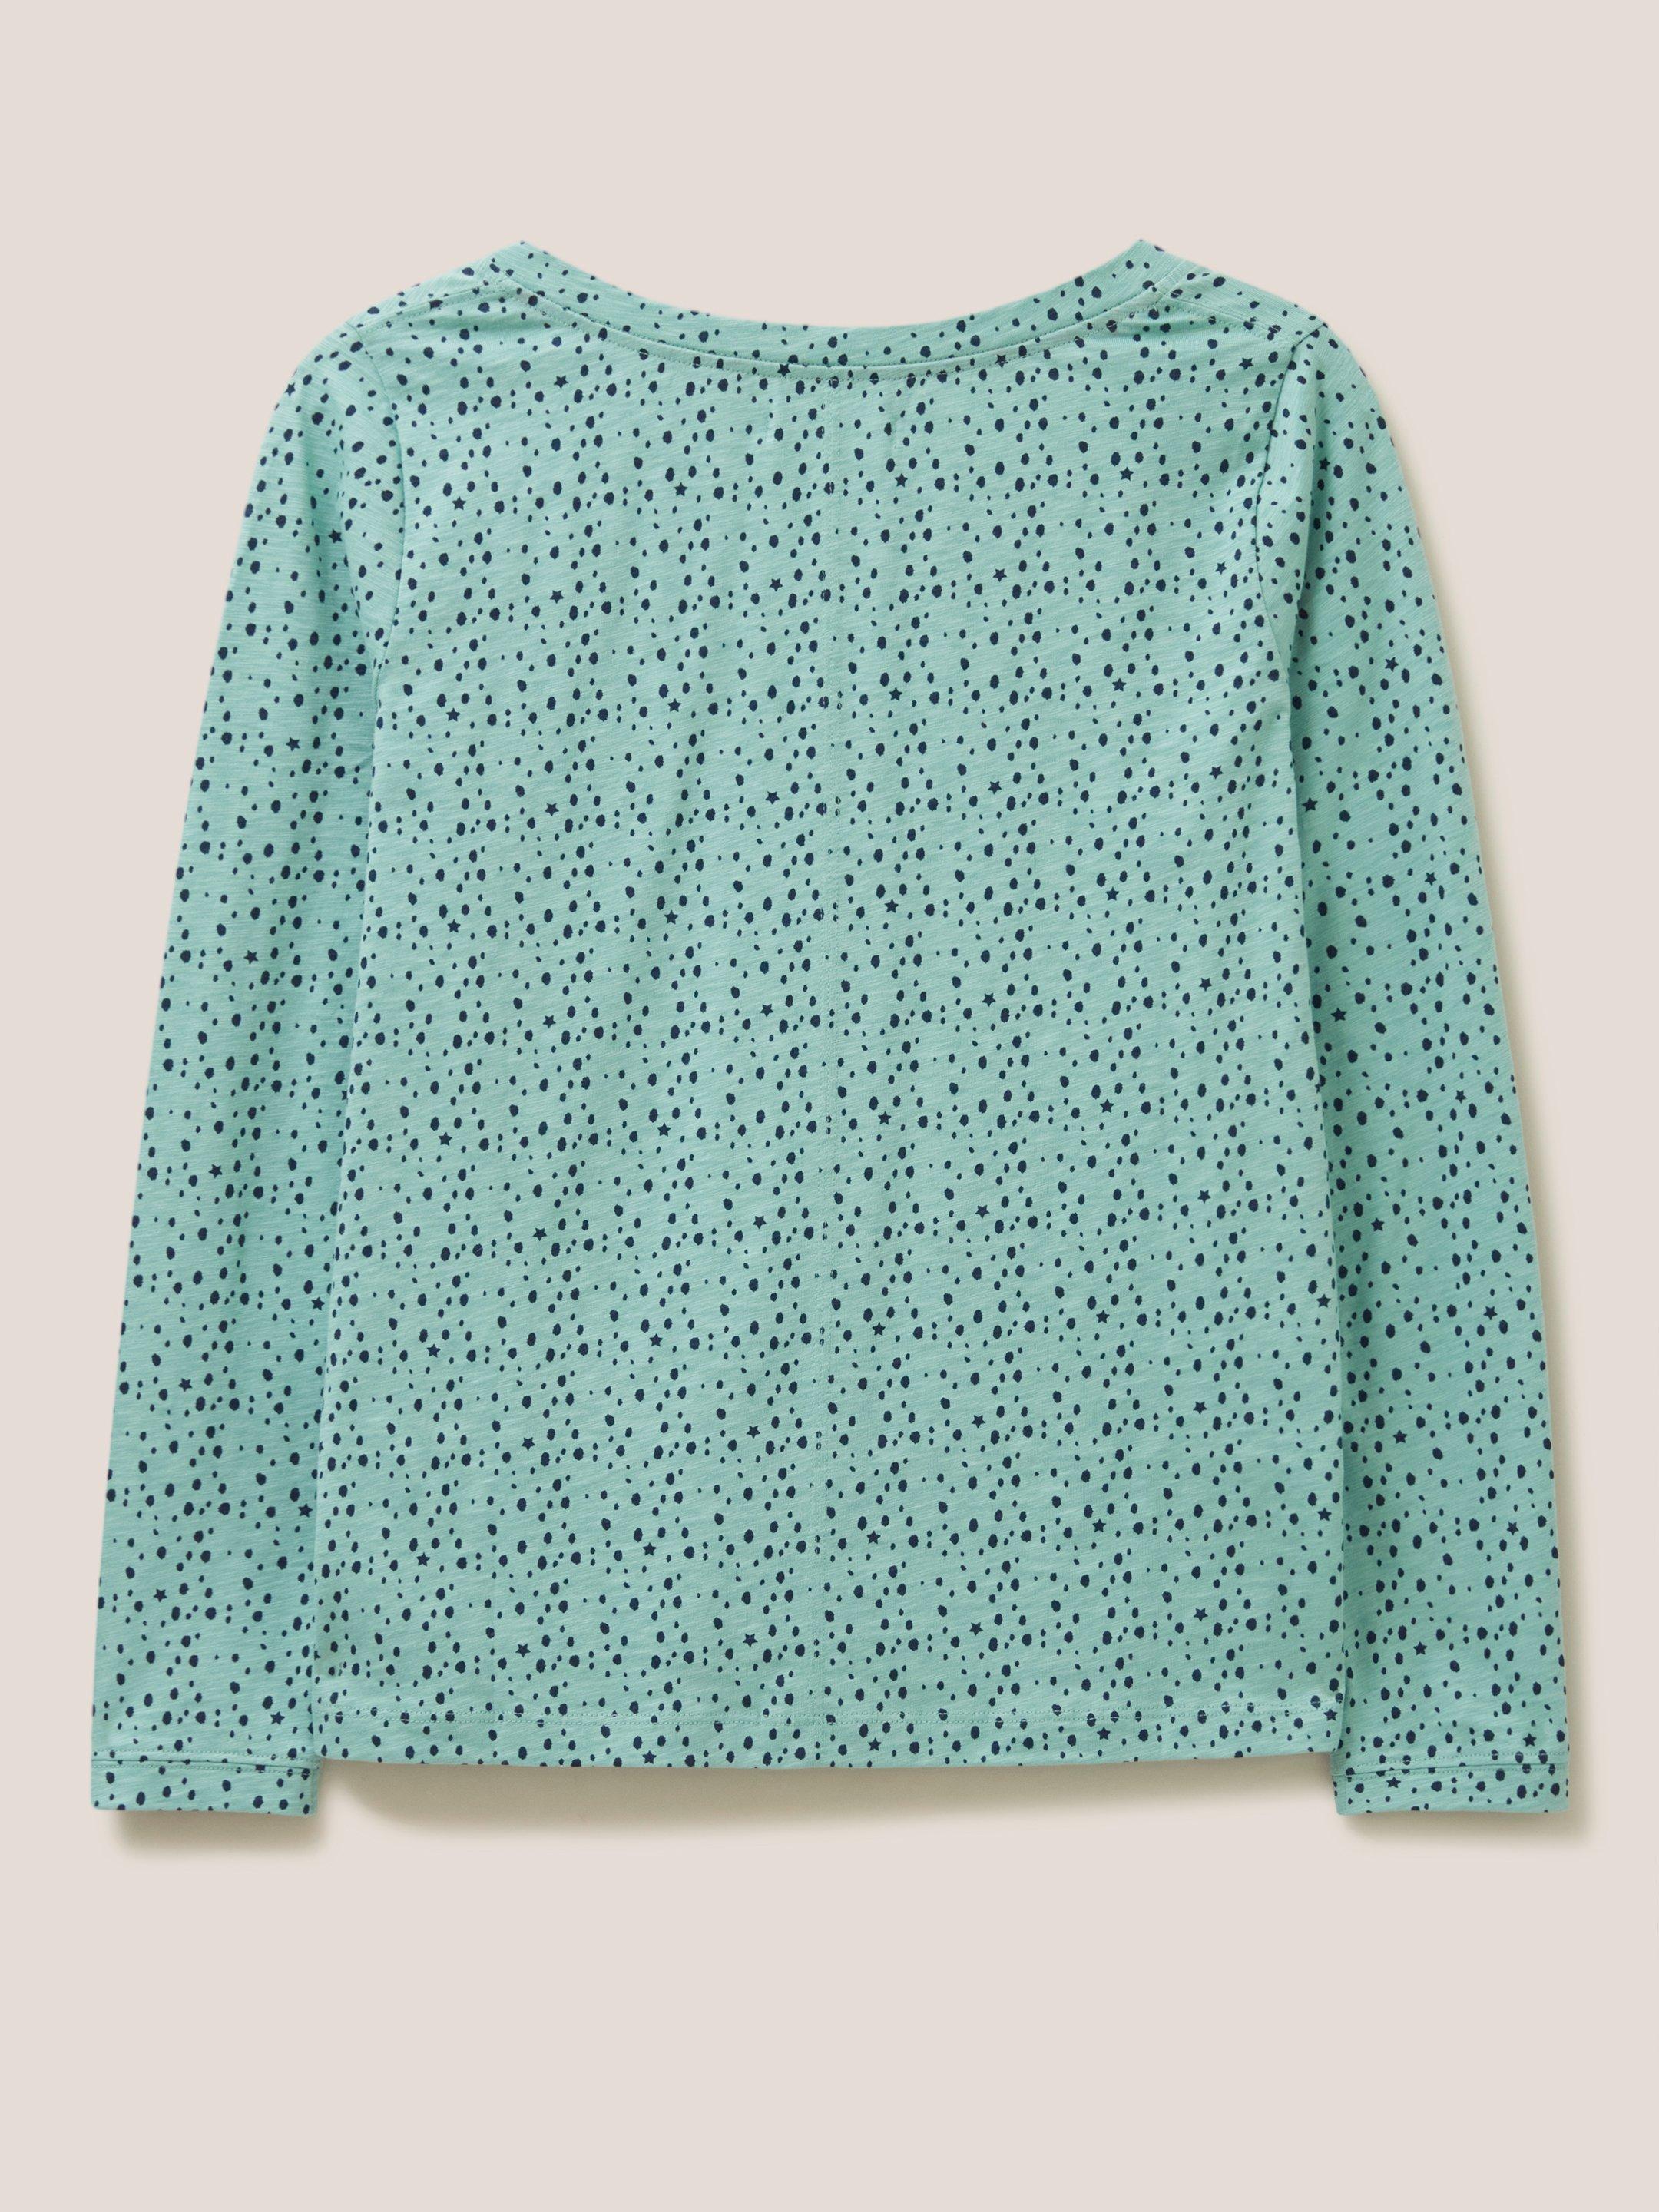 Nelly LS Tee in TEAL PR - FLAT BACK